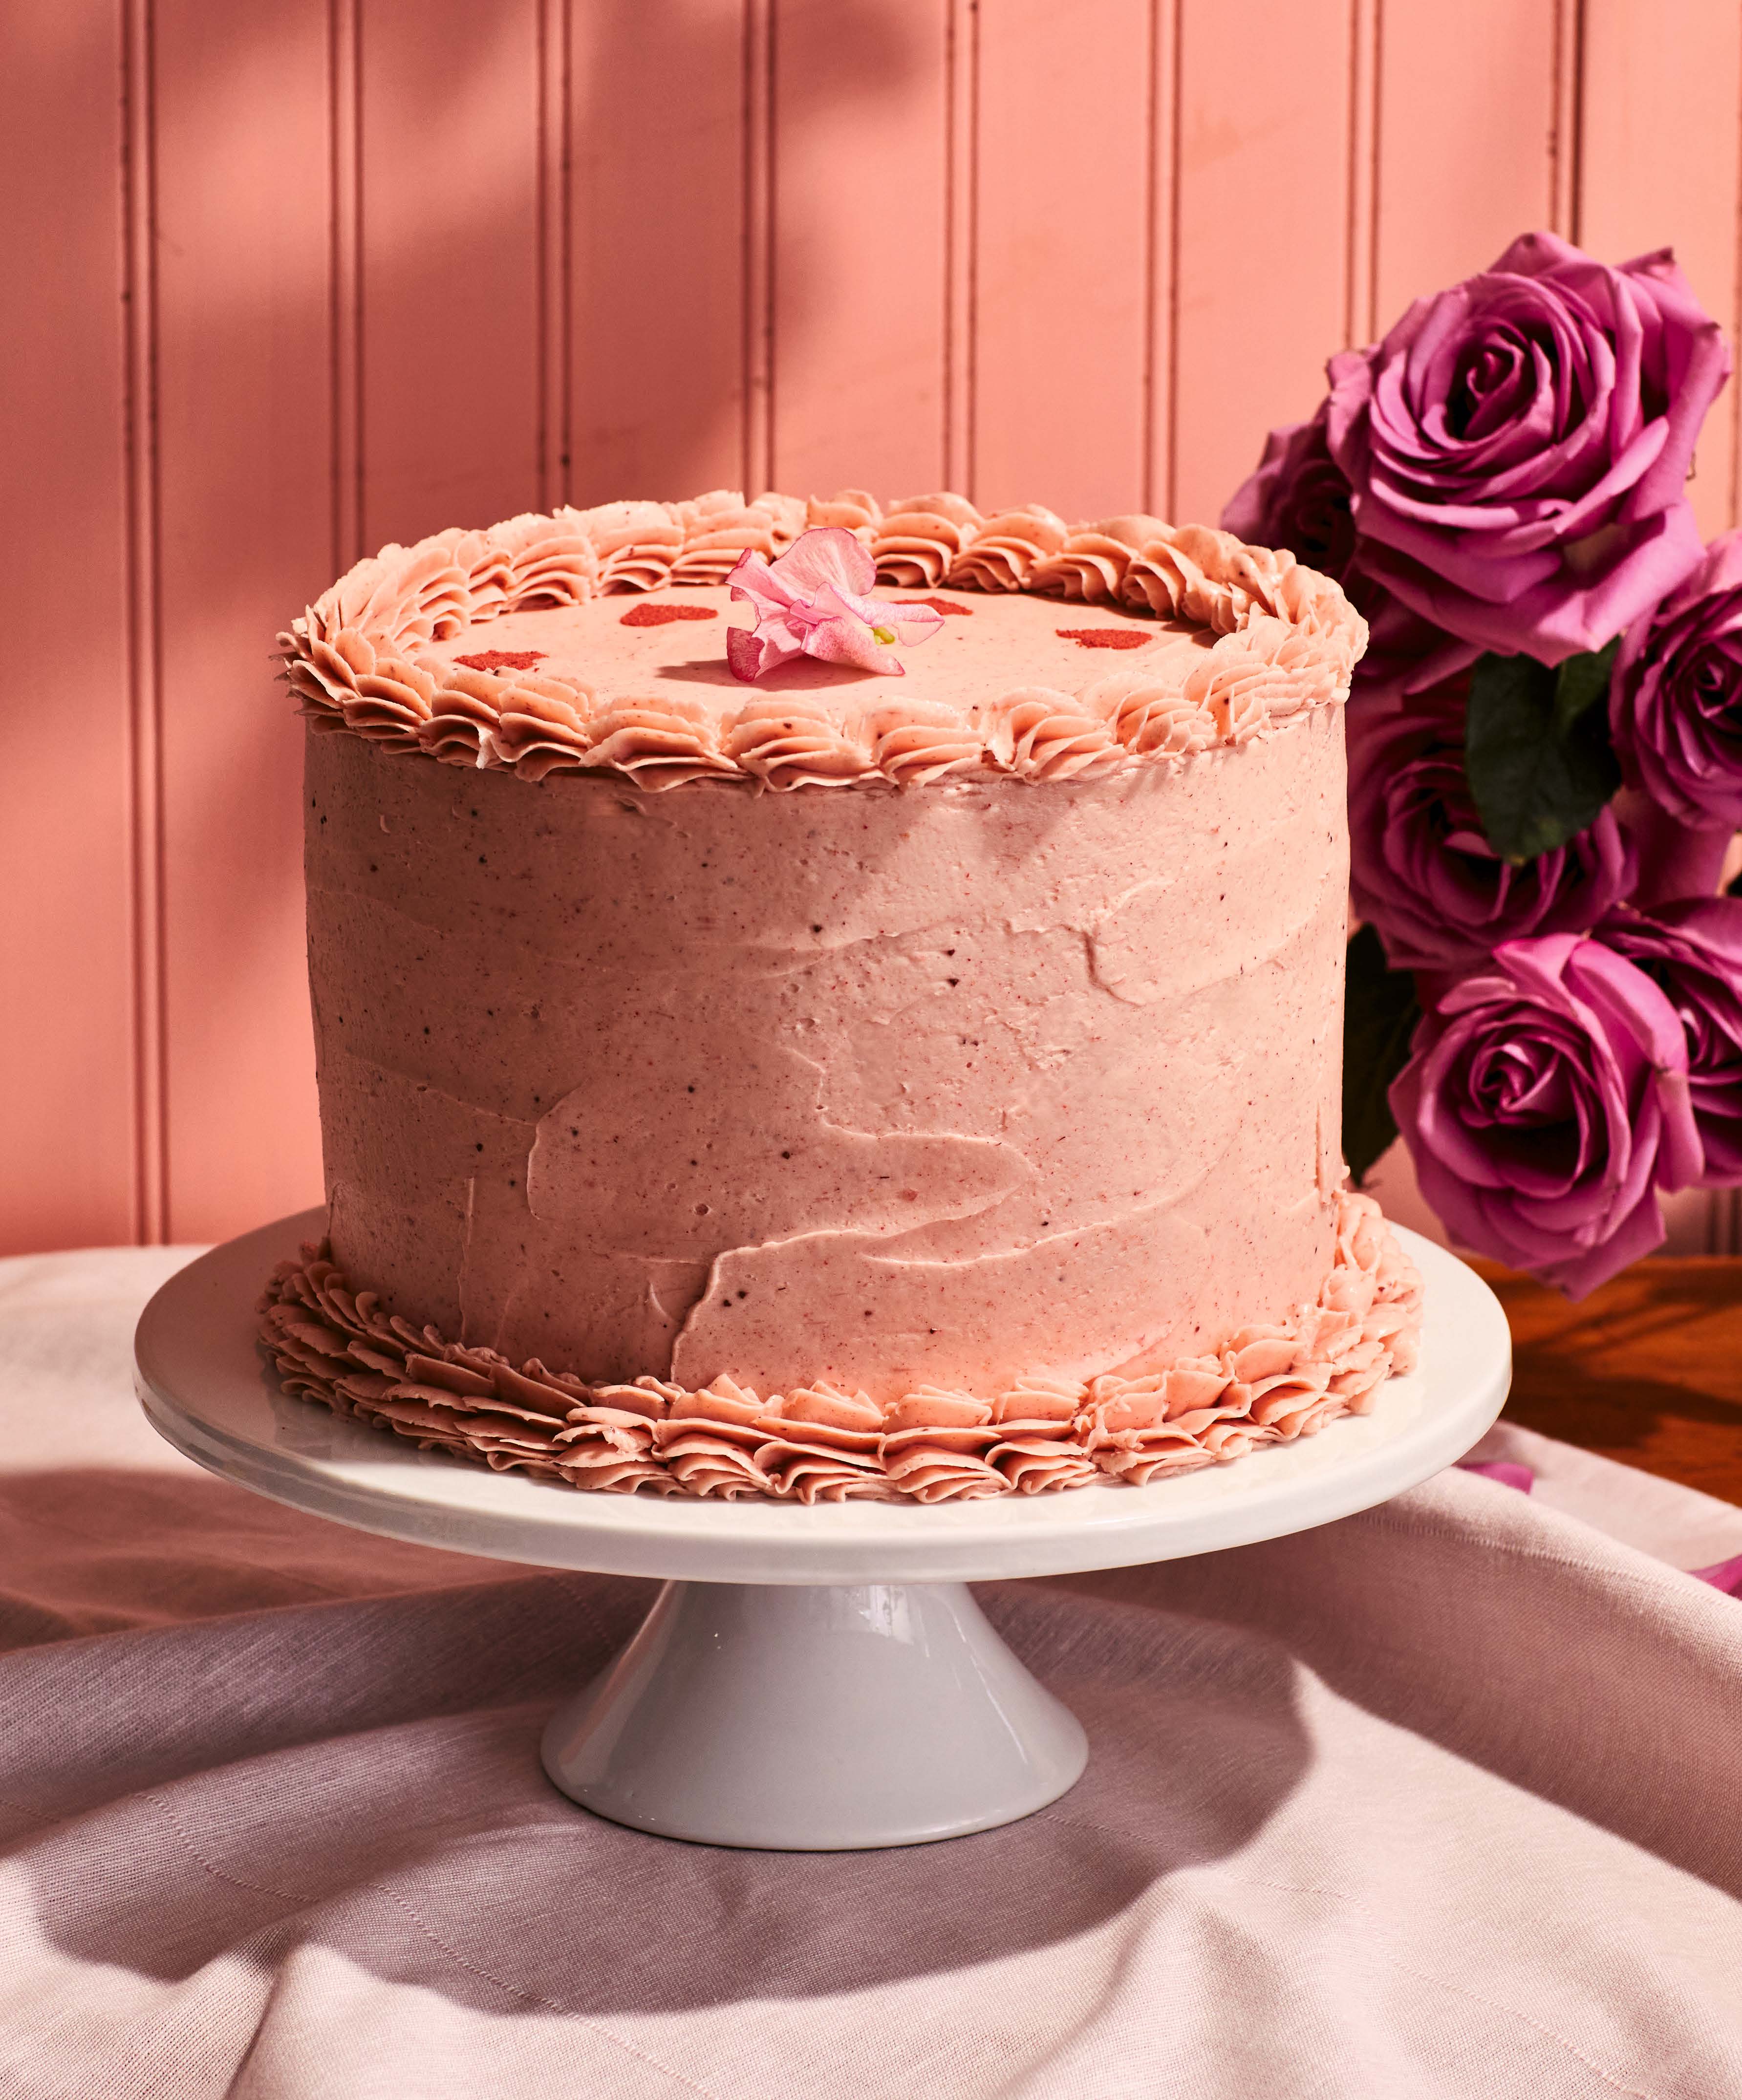 Pink frosted cake on a cake stand.